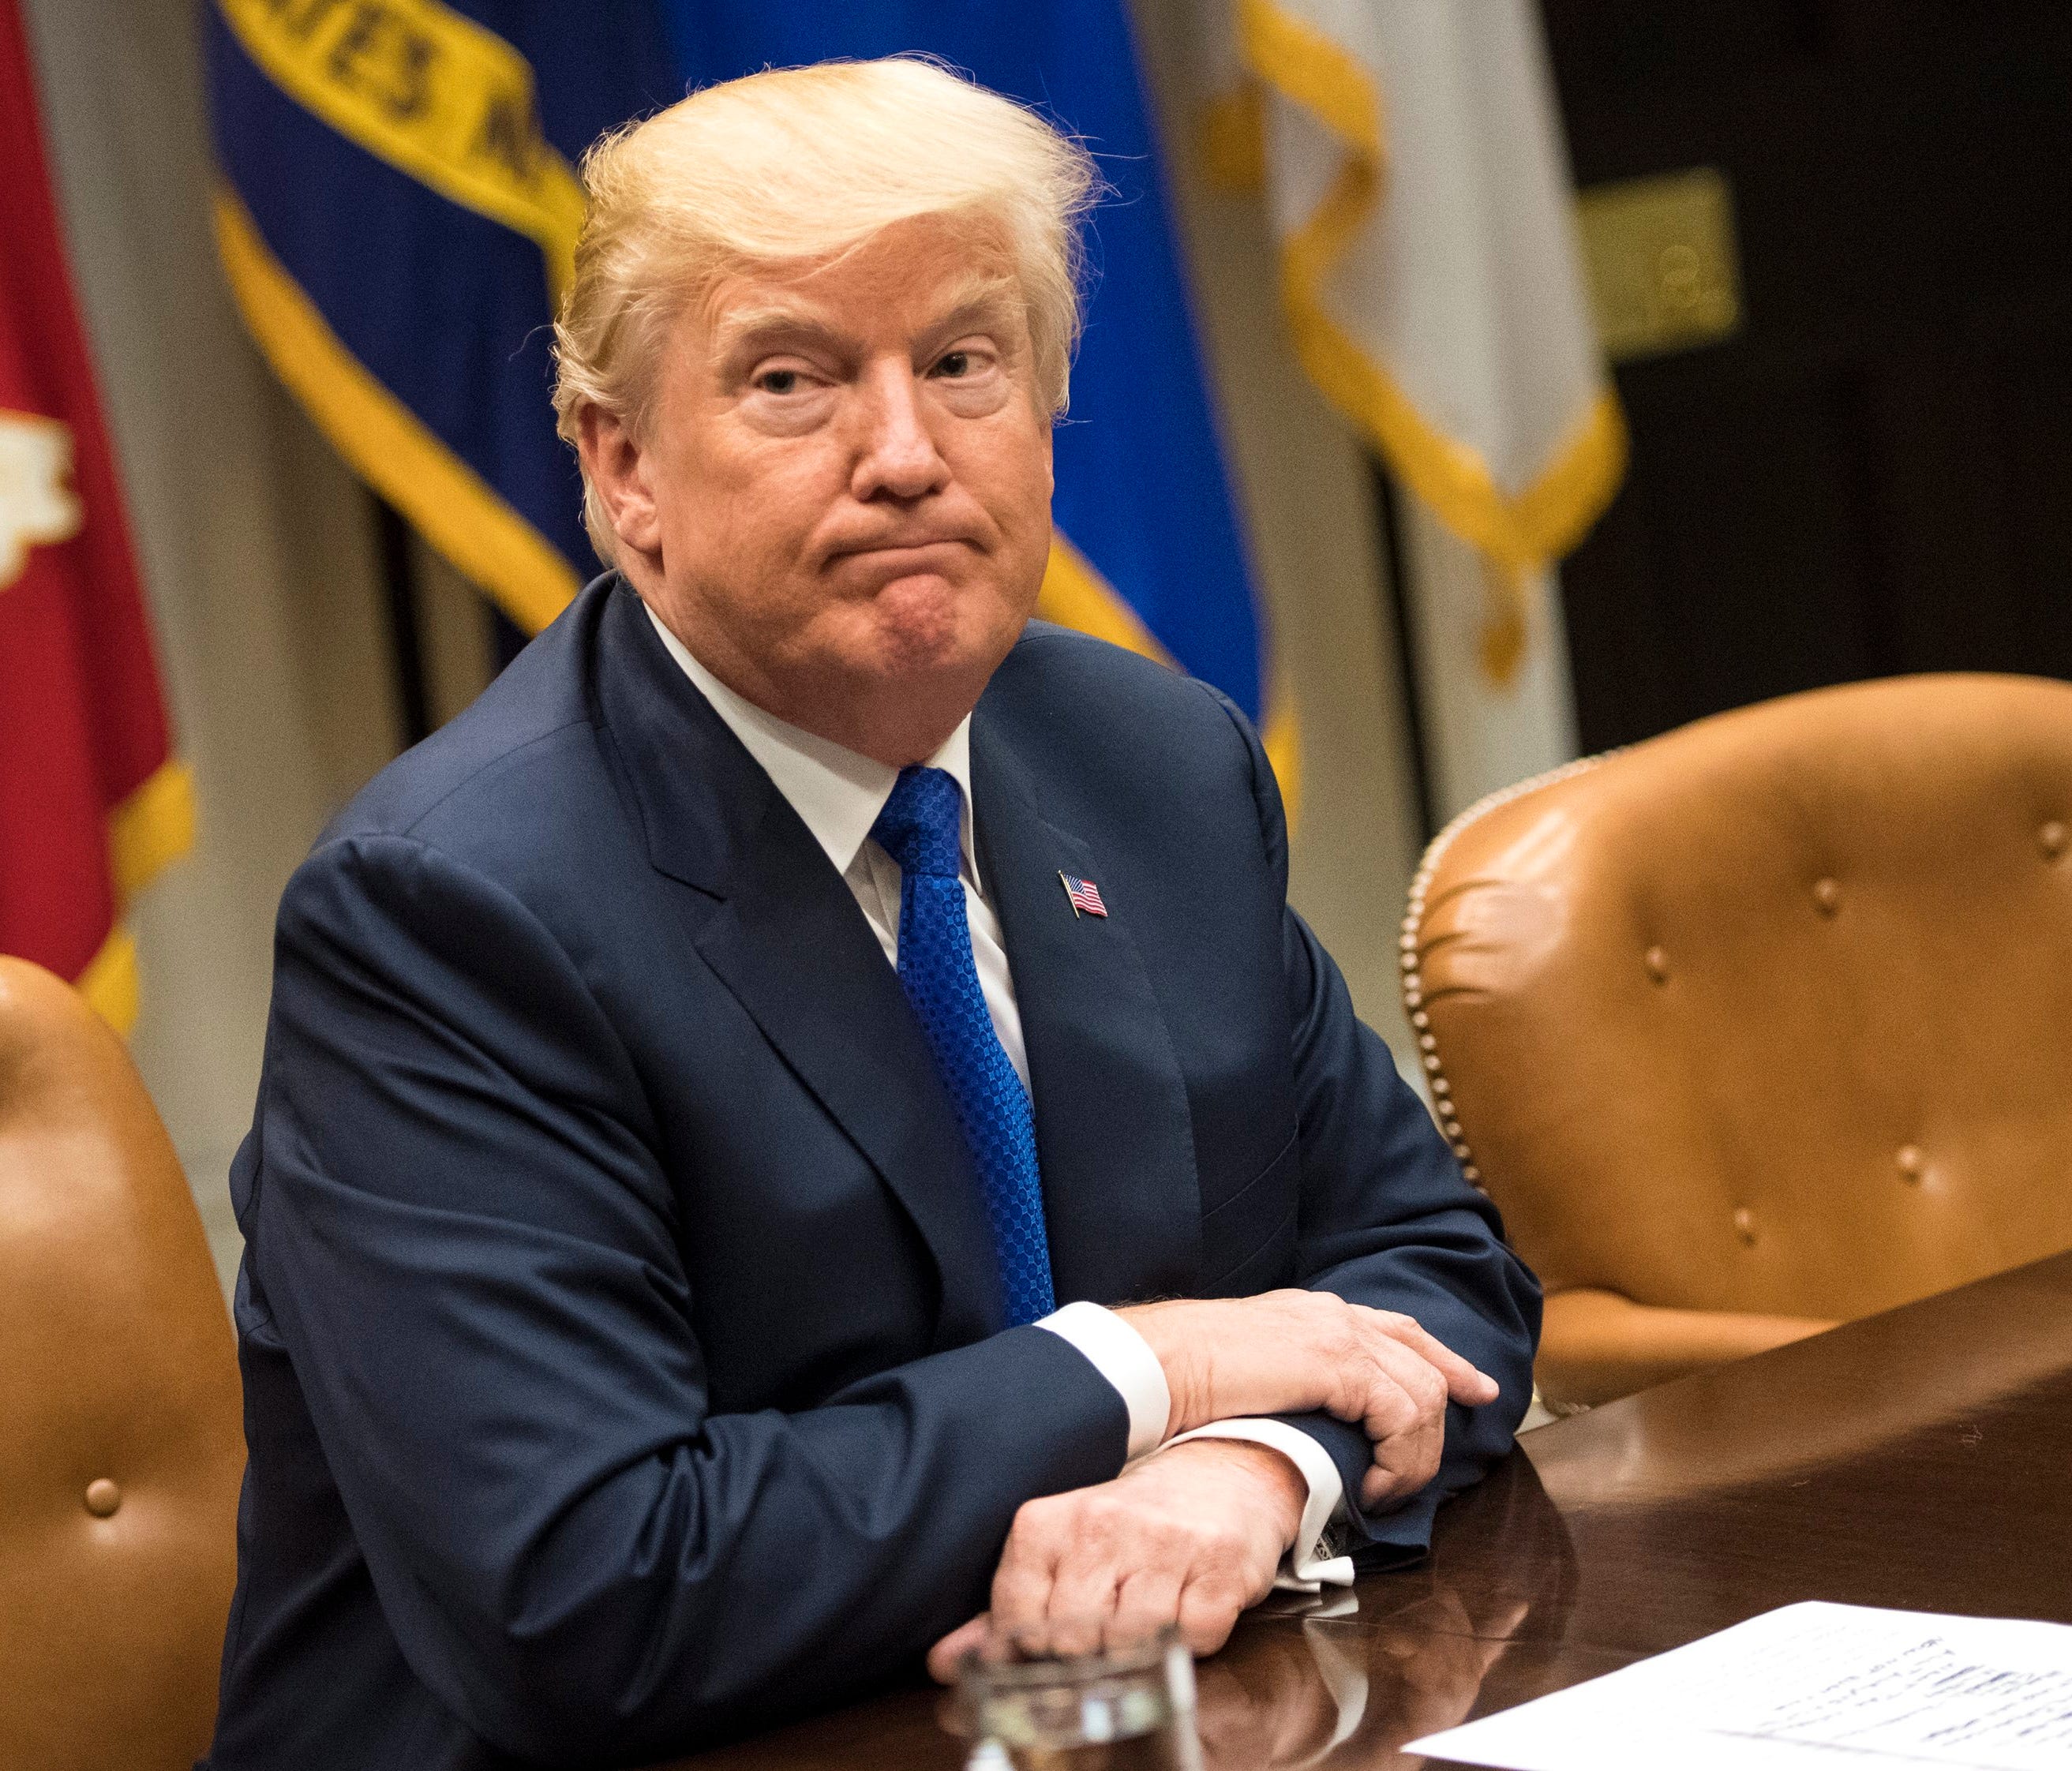 President Trump is pictured speaking to reporters during a meeting with congressional leadership in the White House.